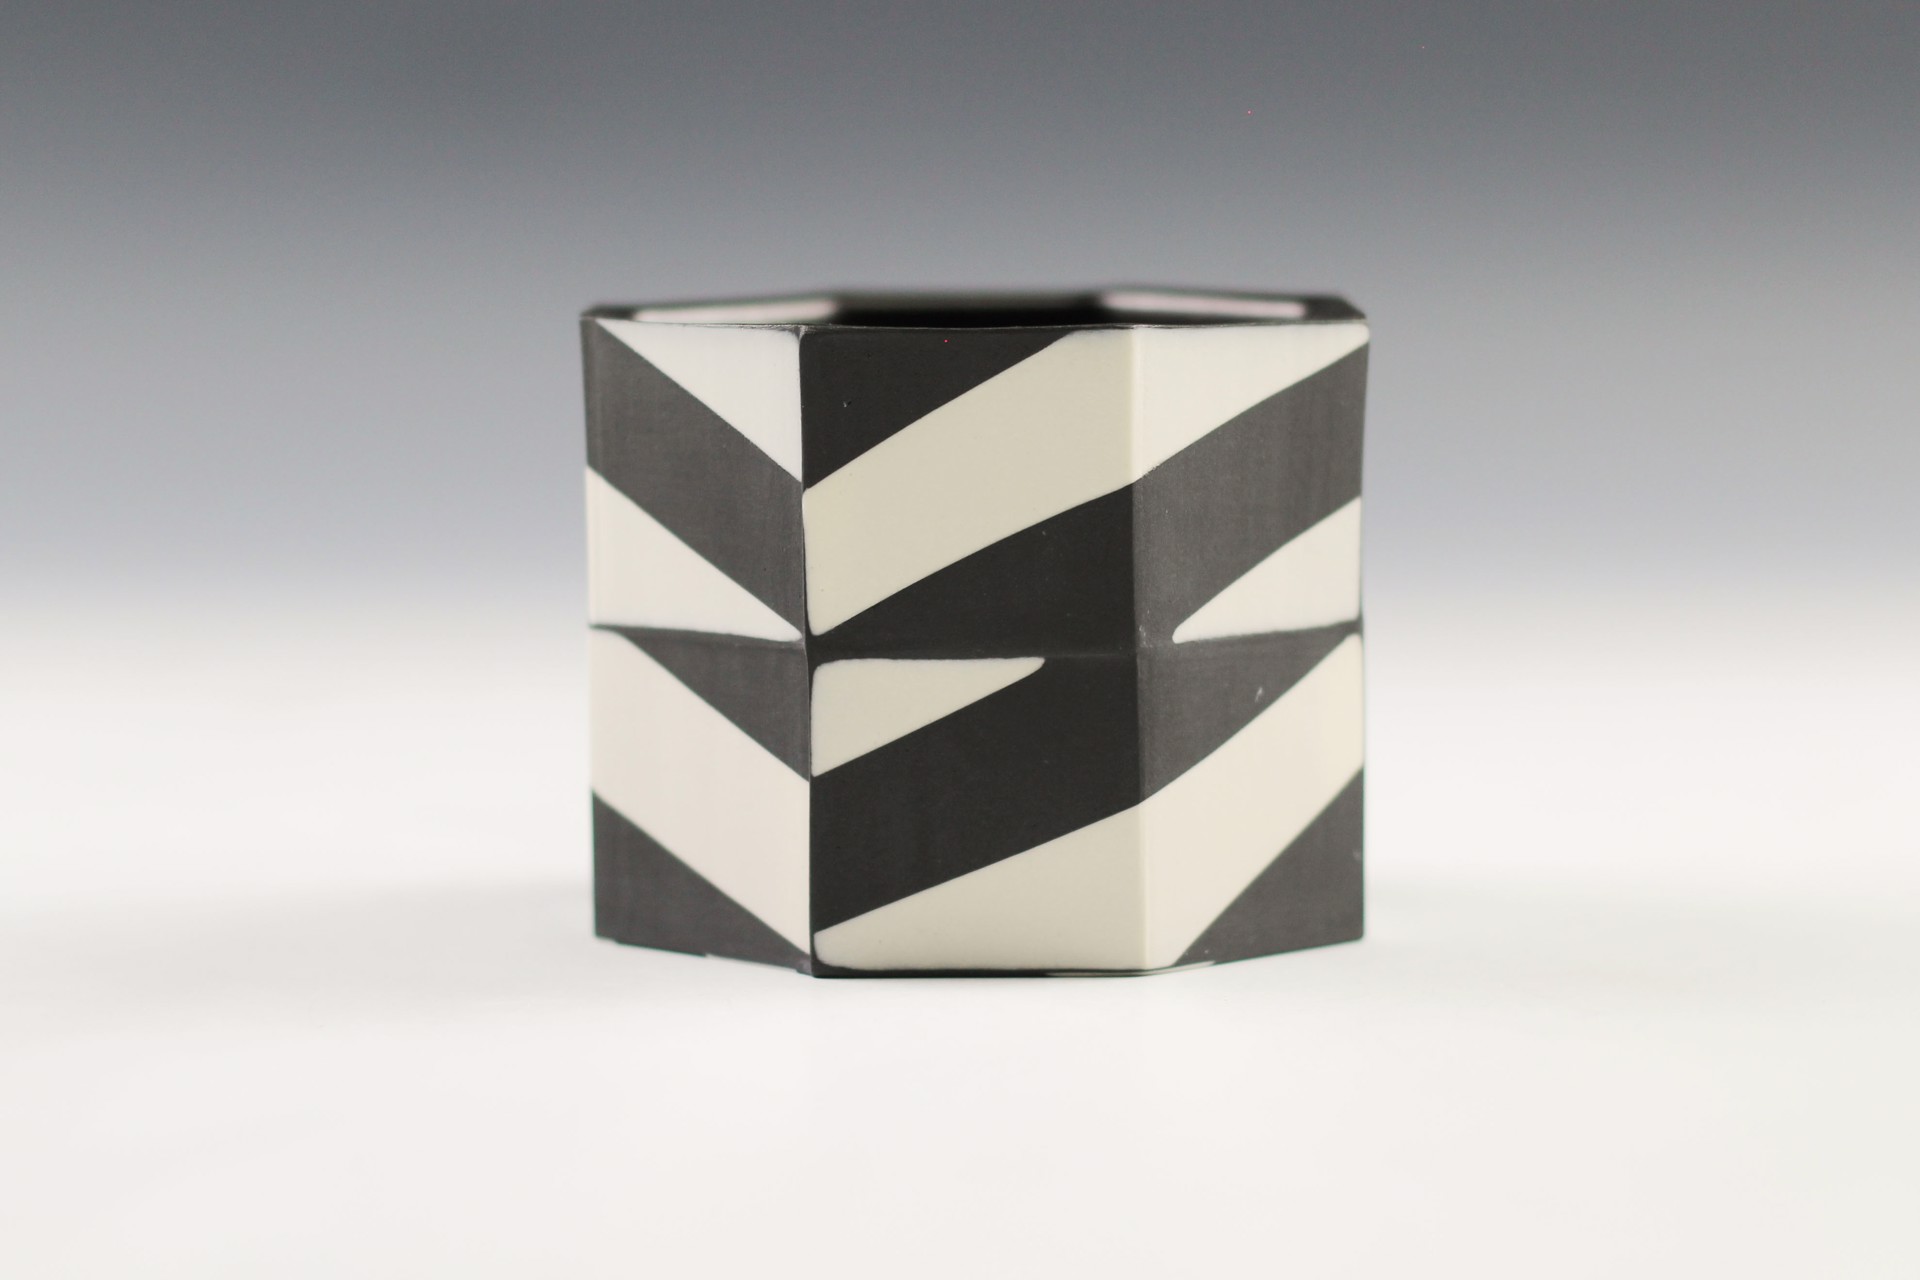 Faceted Inlaid Cup by Daniel Garver